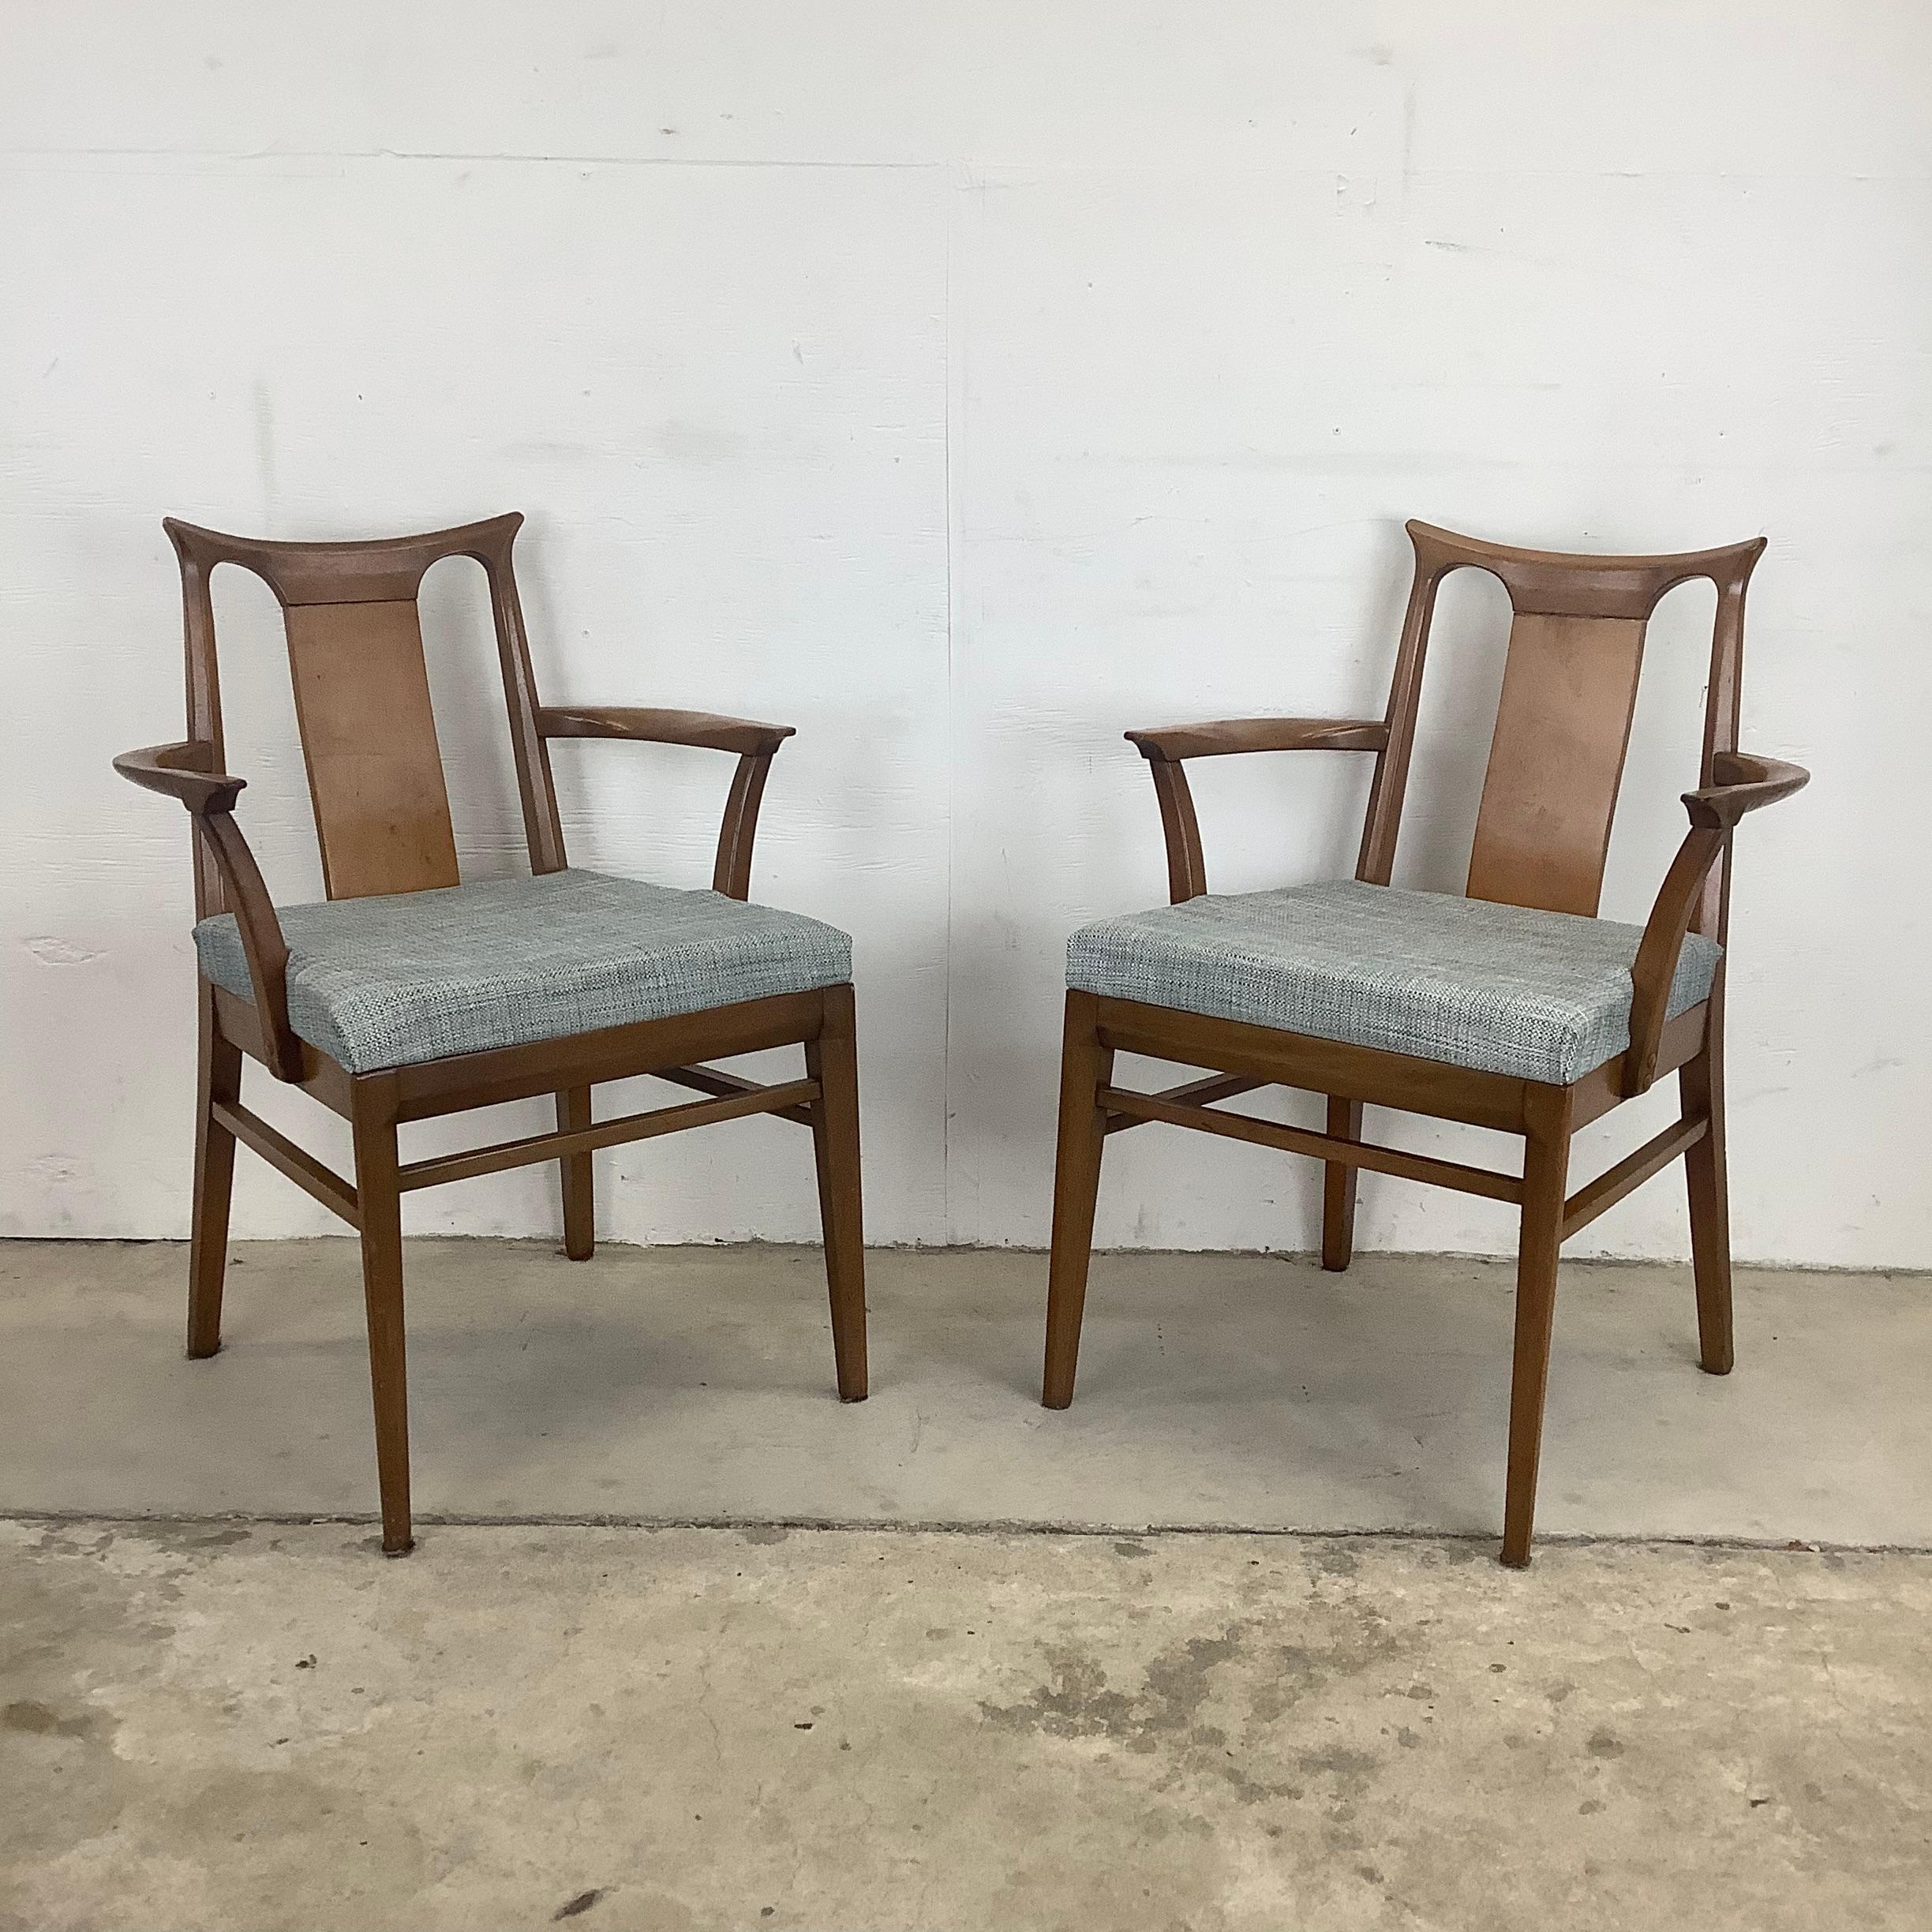 Mid-20th Century Mid-Century Walnut Dining Chairs From White Furniture- Set of Six